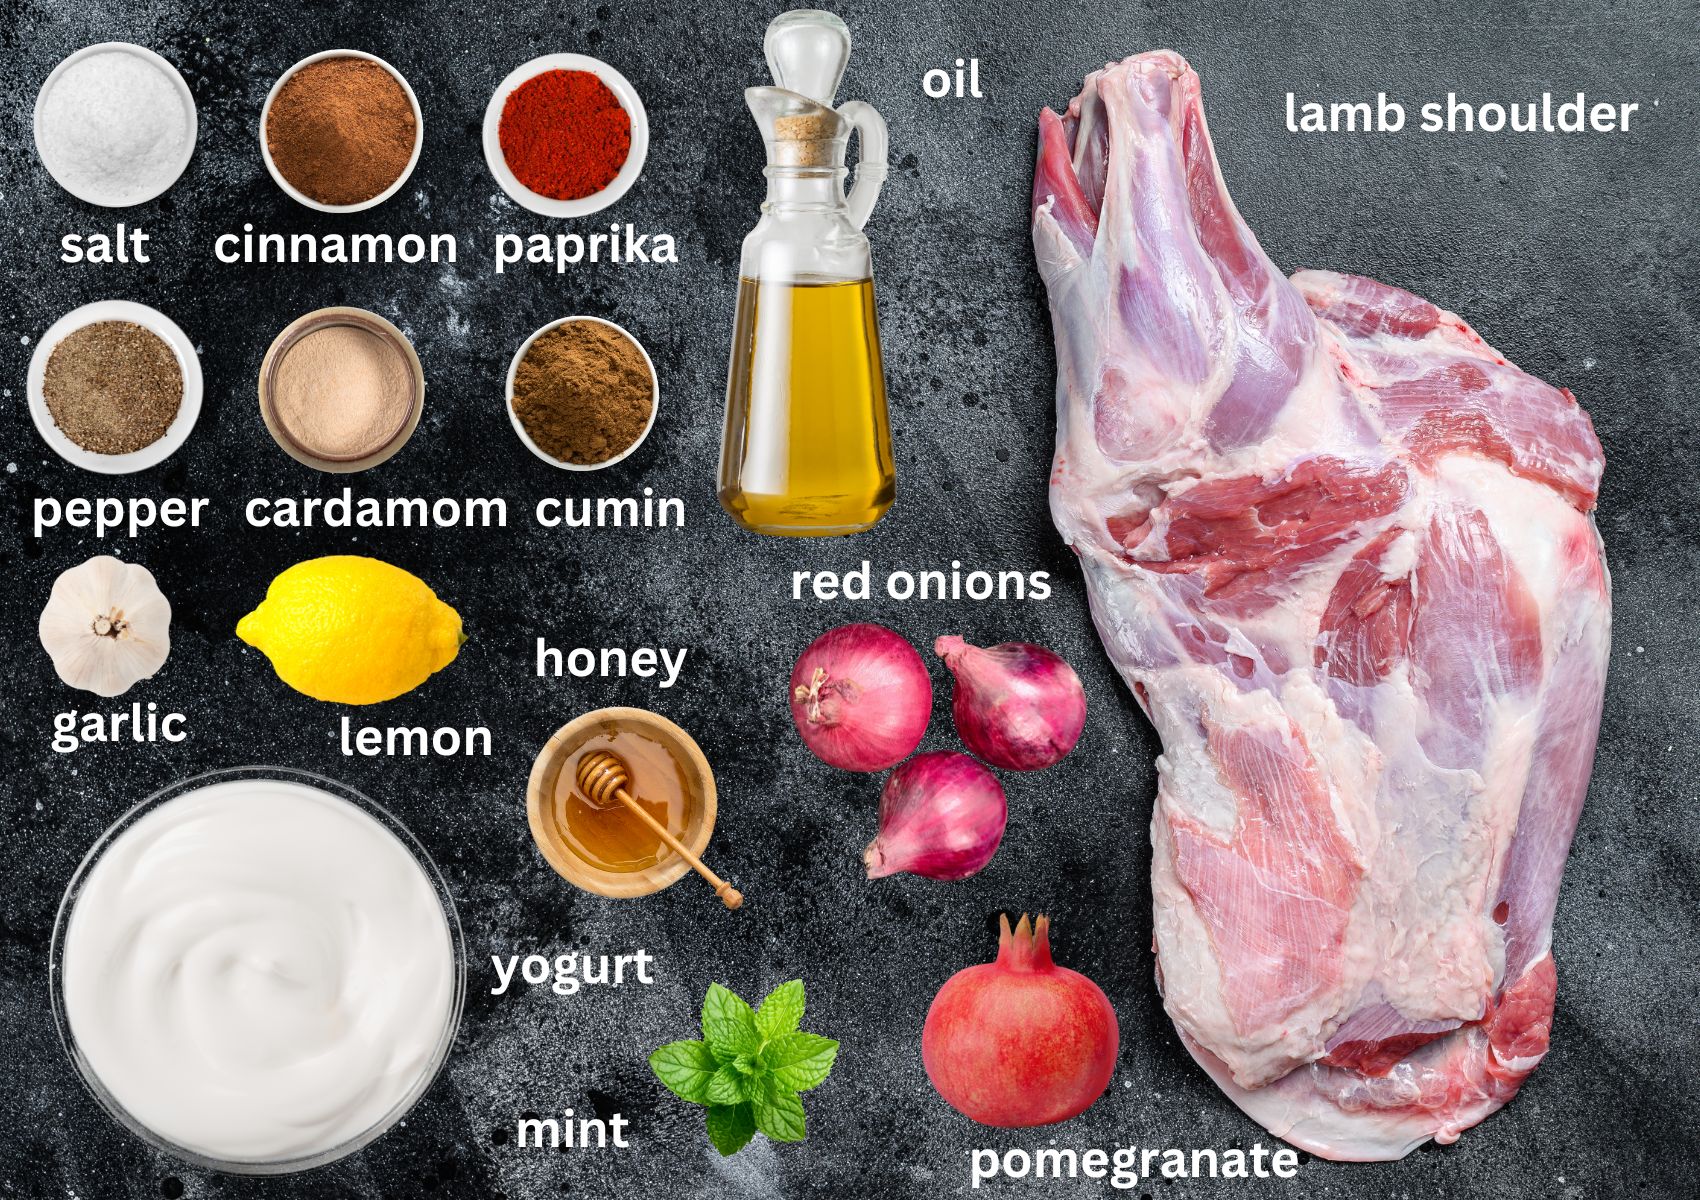 labeled ingredients for making lamb shoulder with pomegranate and mint yogurt.